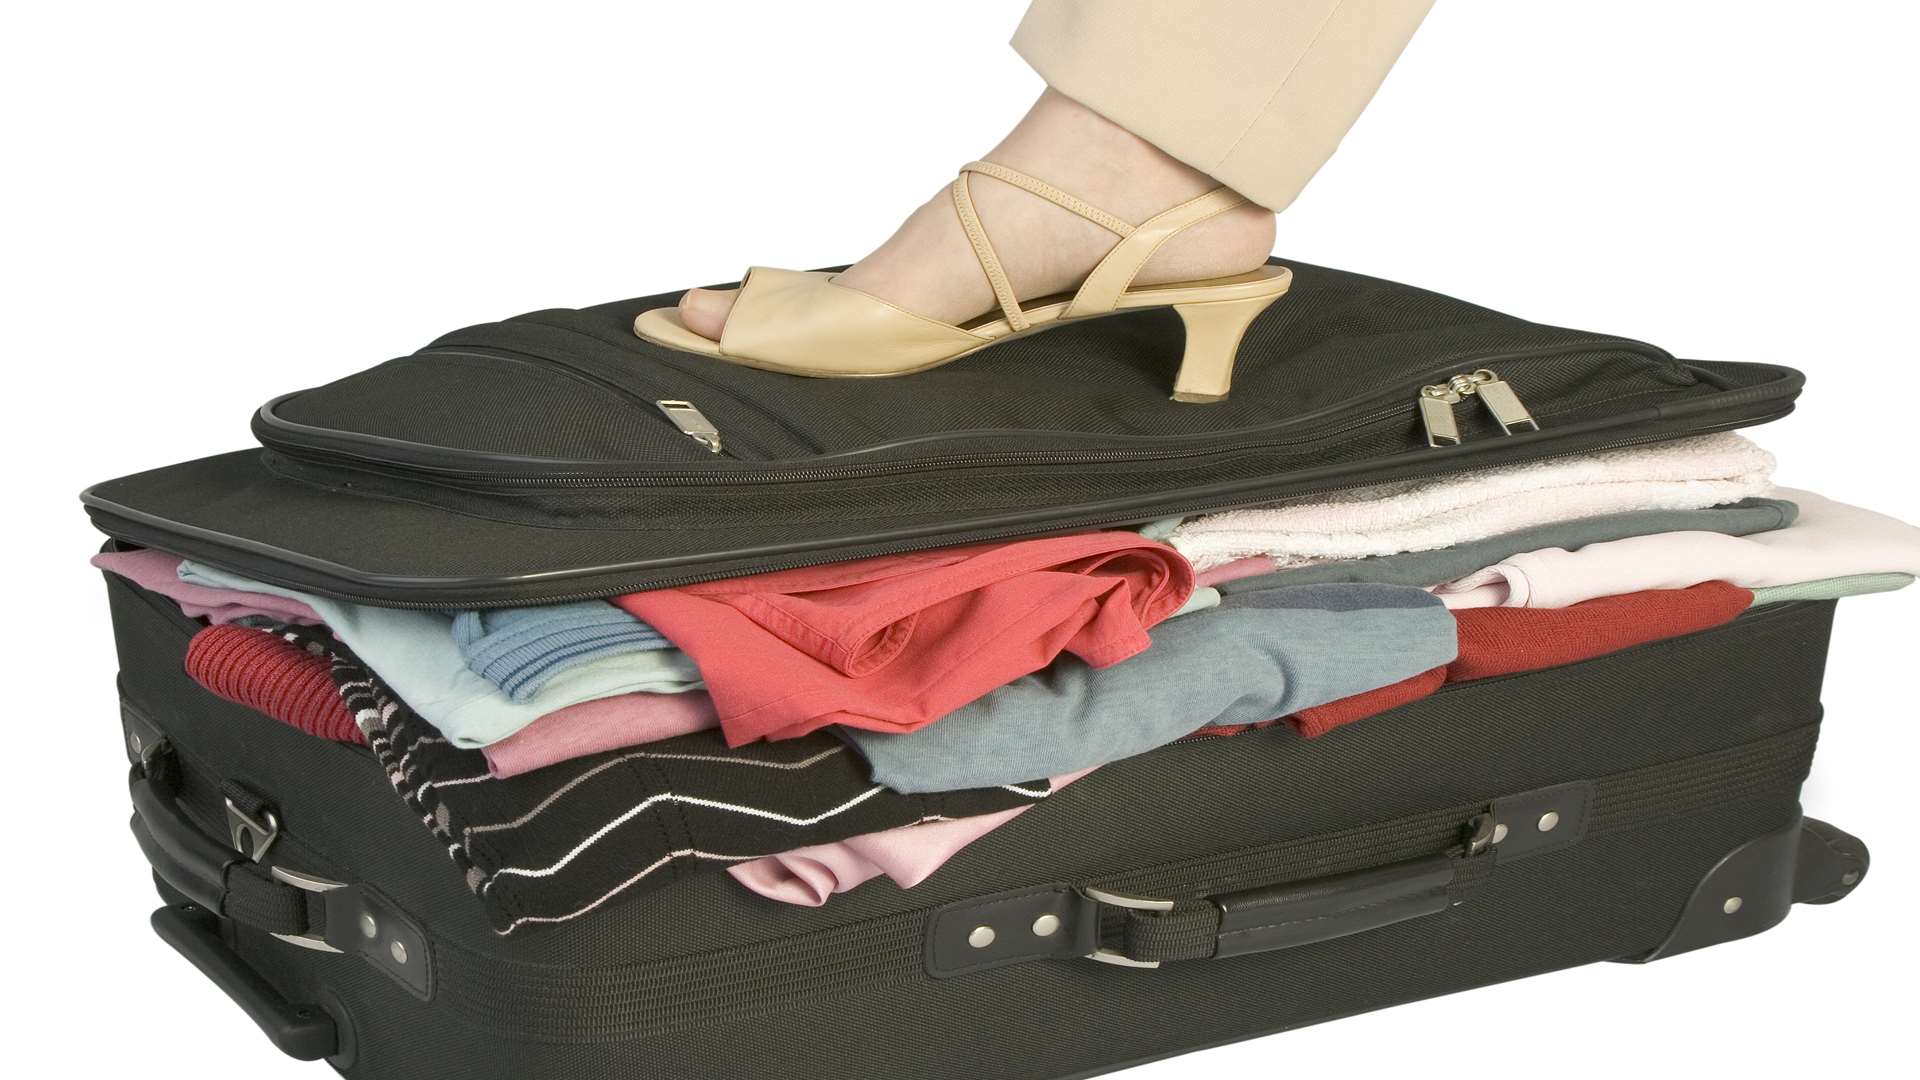 Learn to pack like a pro this summer